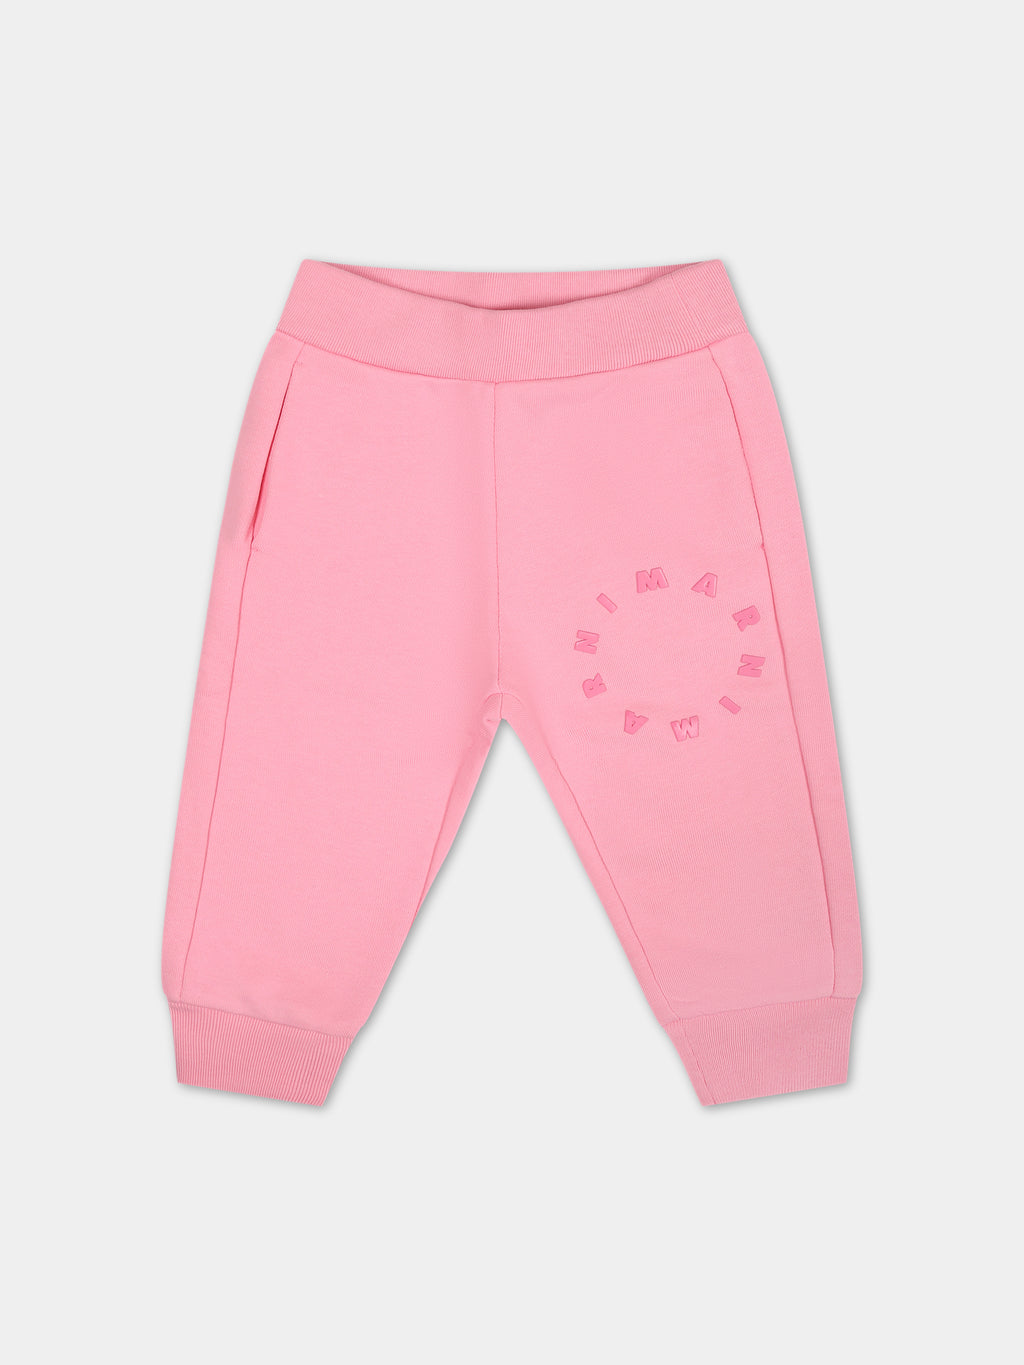 Pink trousers for baby girl with logo